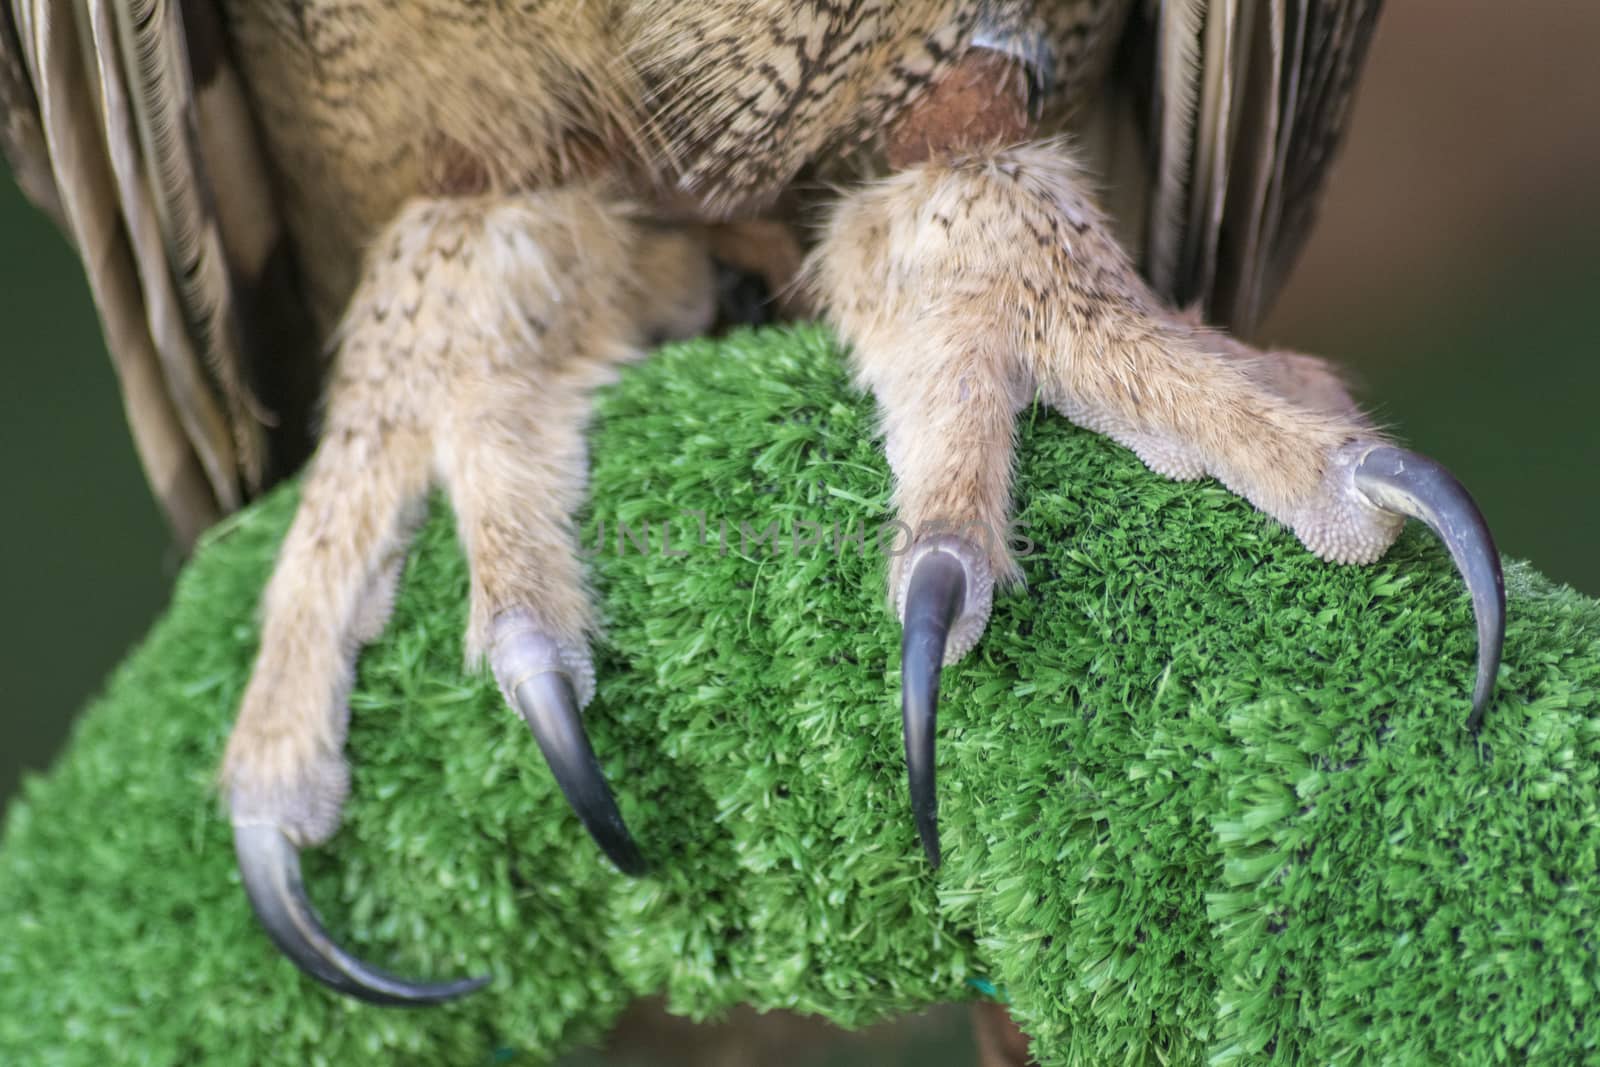 The Eurasian eagle-owl claws(Bubo bubo), species of eagle-owl resident in much of Eurasia